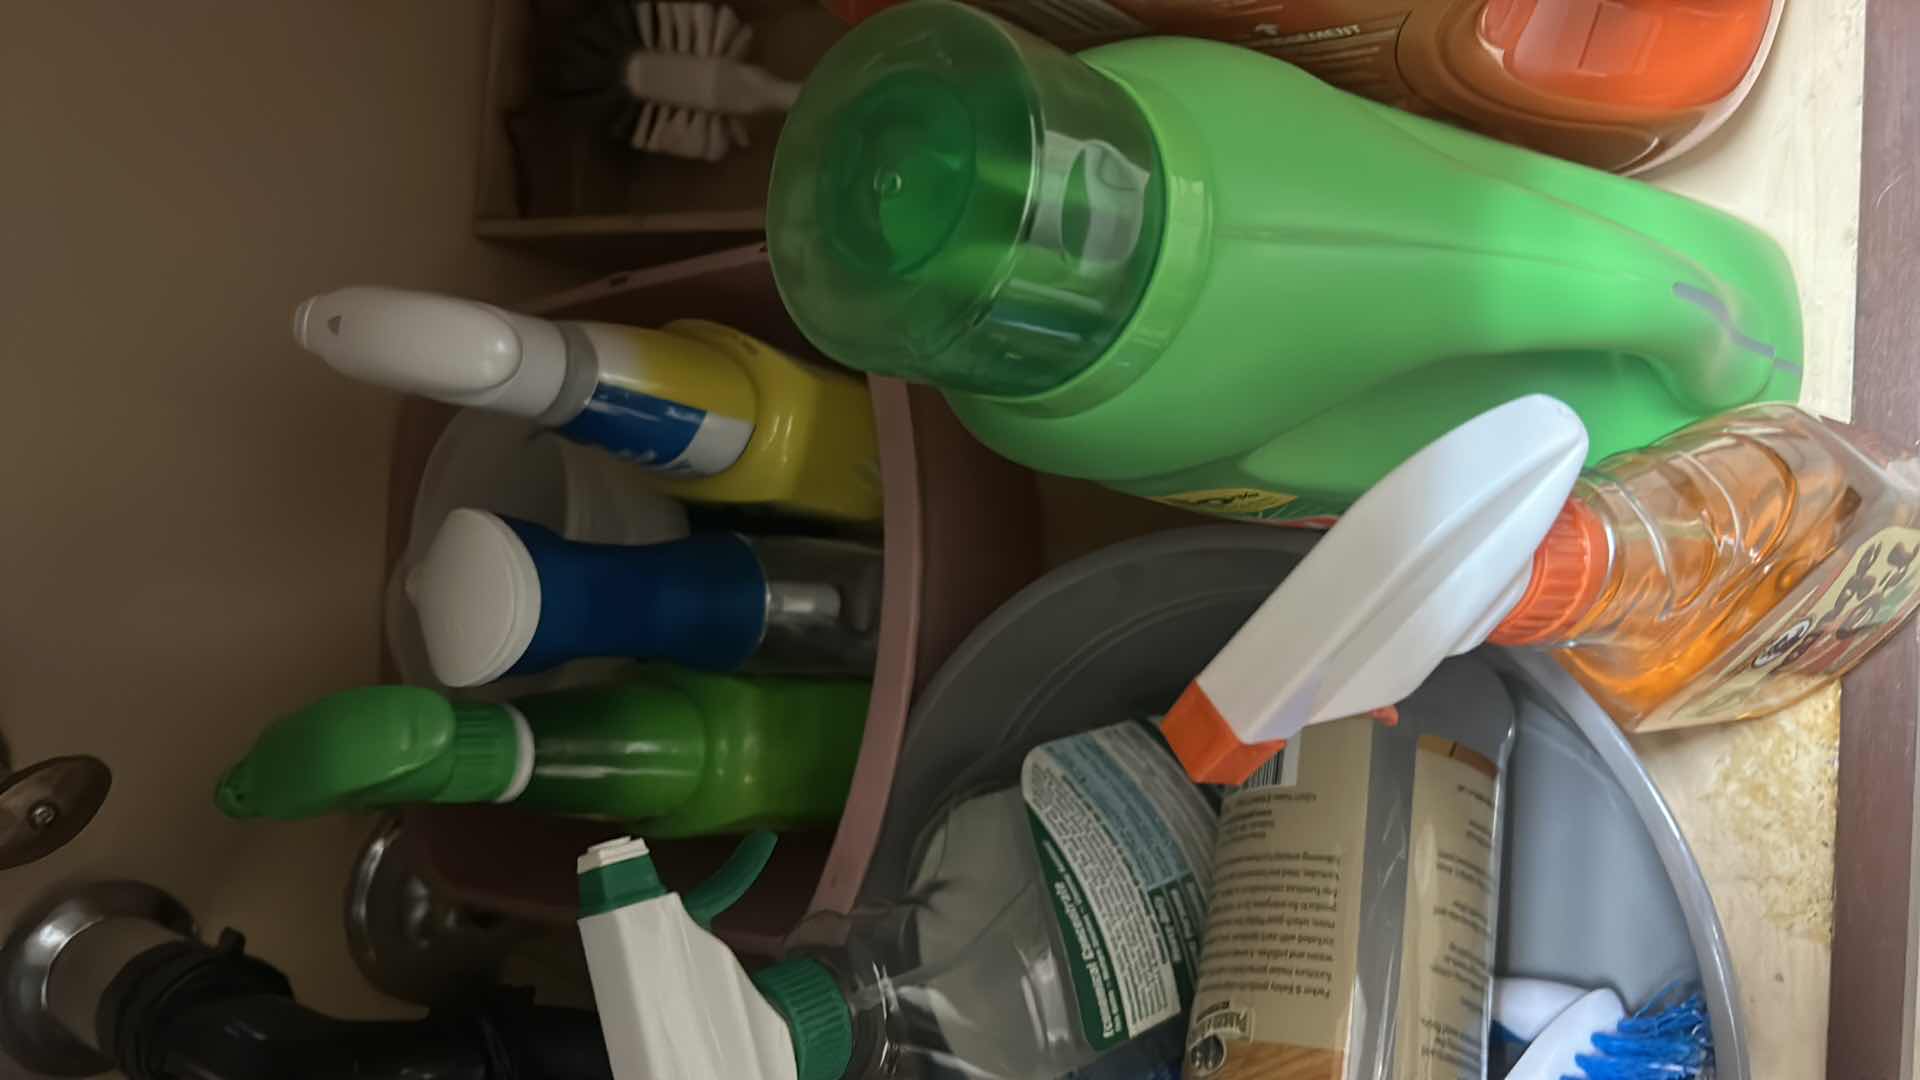 Photo 5 of CLEANING SUPPLIES UNDER SINK IN LAUNDRY ROOM